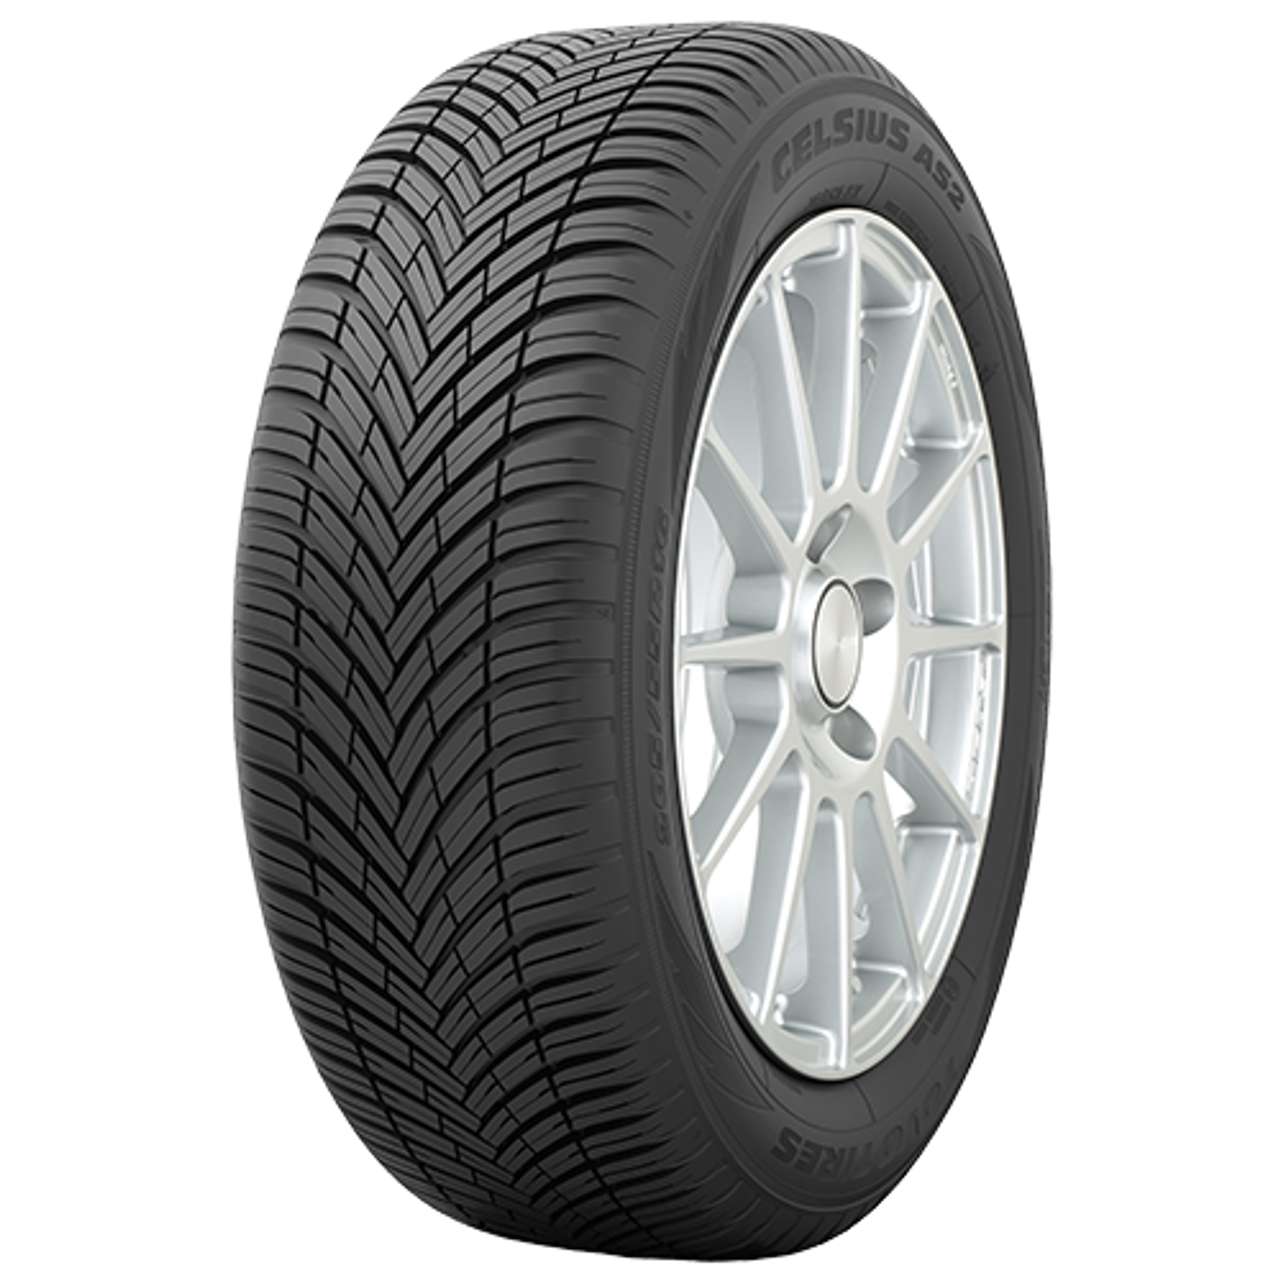 TOYO CELSIUS AS2 195/55R15 89V BSW